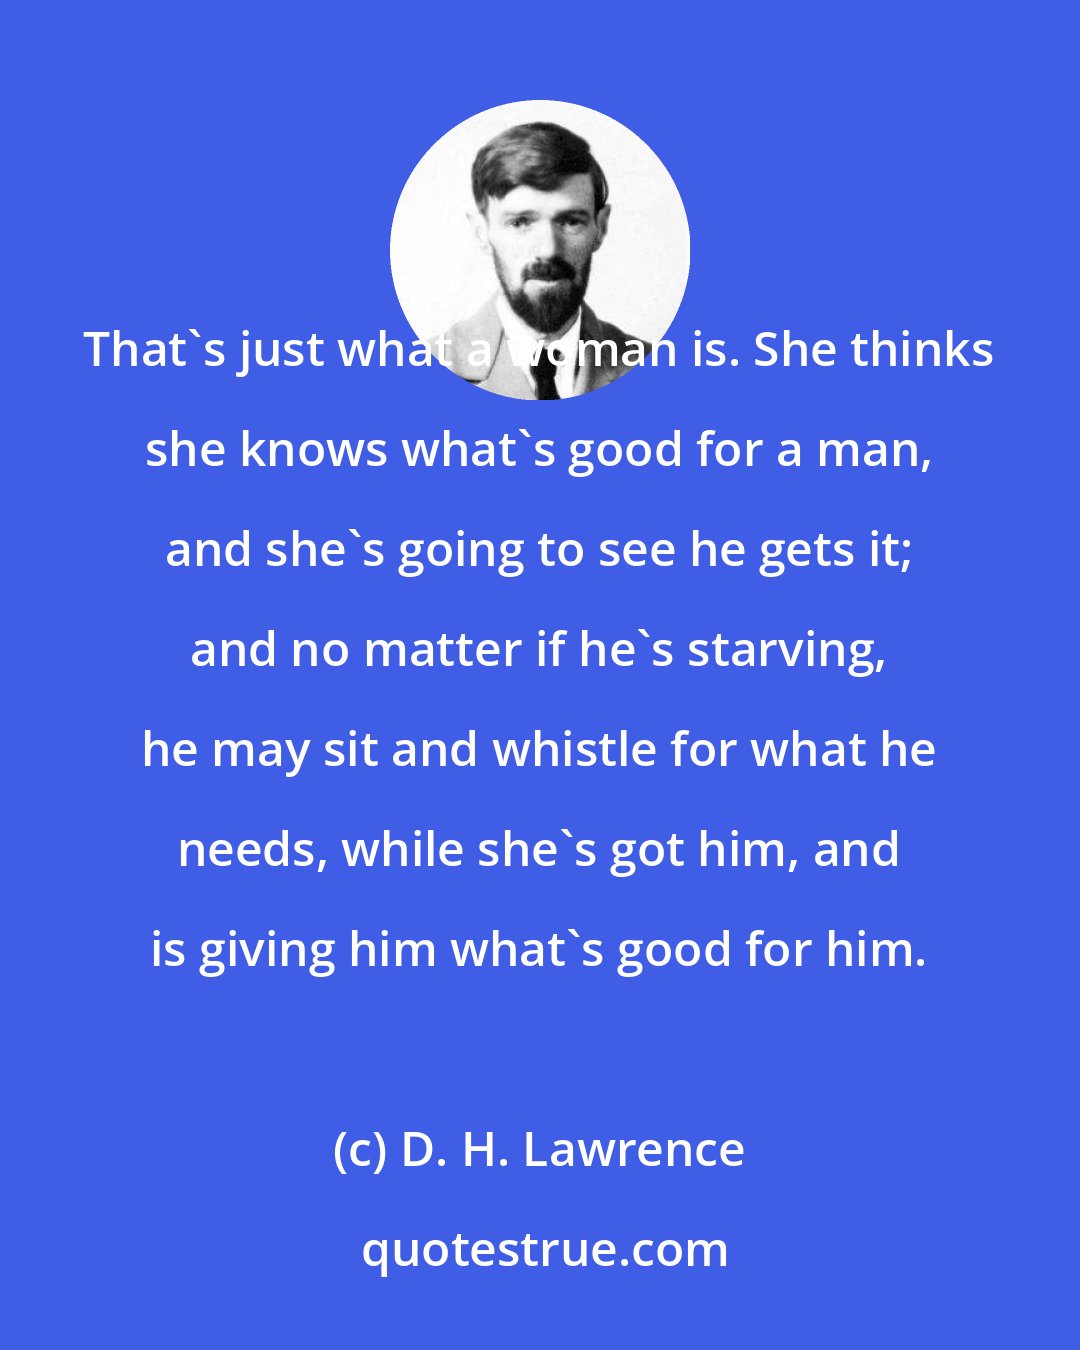 D. H. Lawrence: That's just what a woman is. She thinks she knows what's good for a man, and she's going to see he gets it; and no matter if he's starving, he may sit and whistle for what he needs, while she's got him, and is giving him what's good for him.